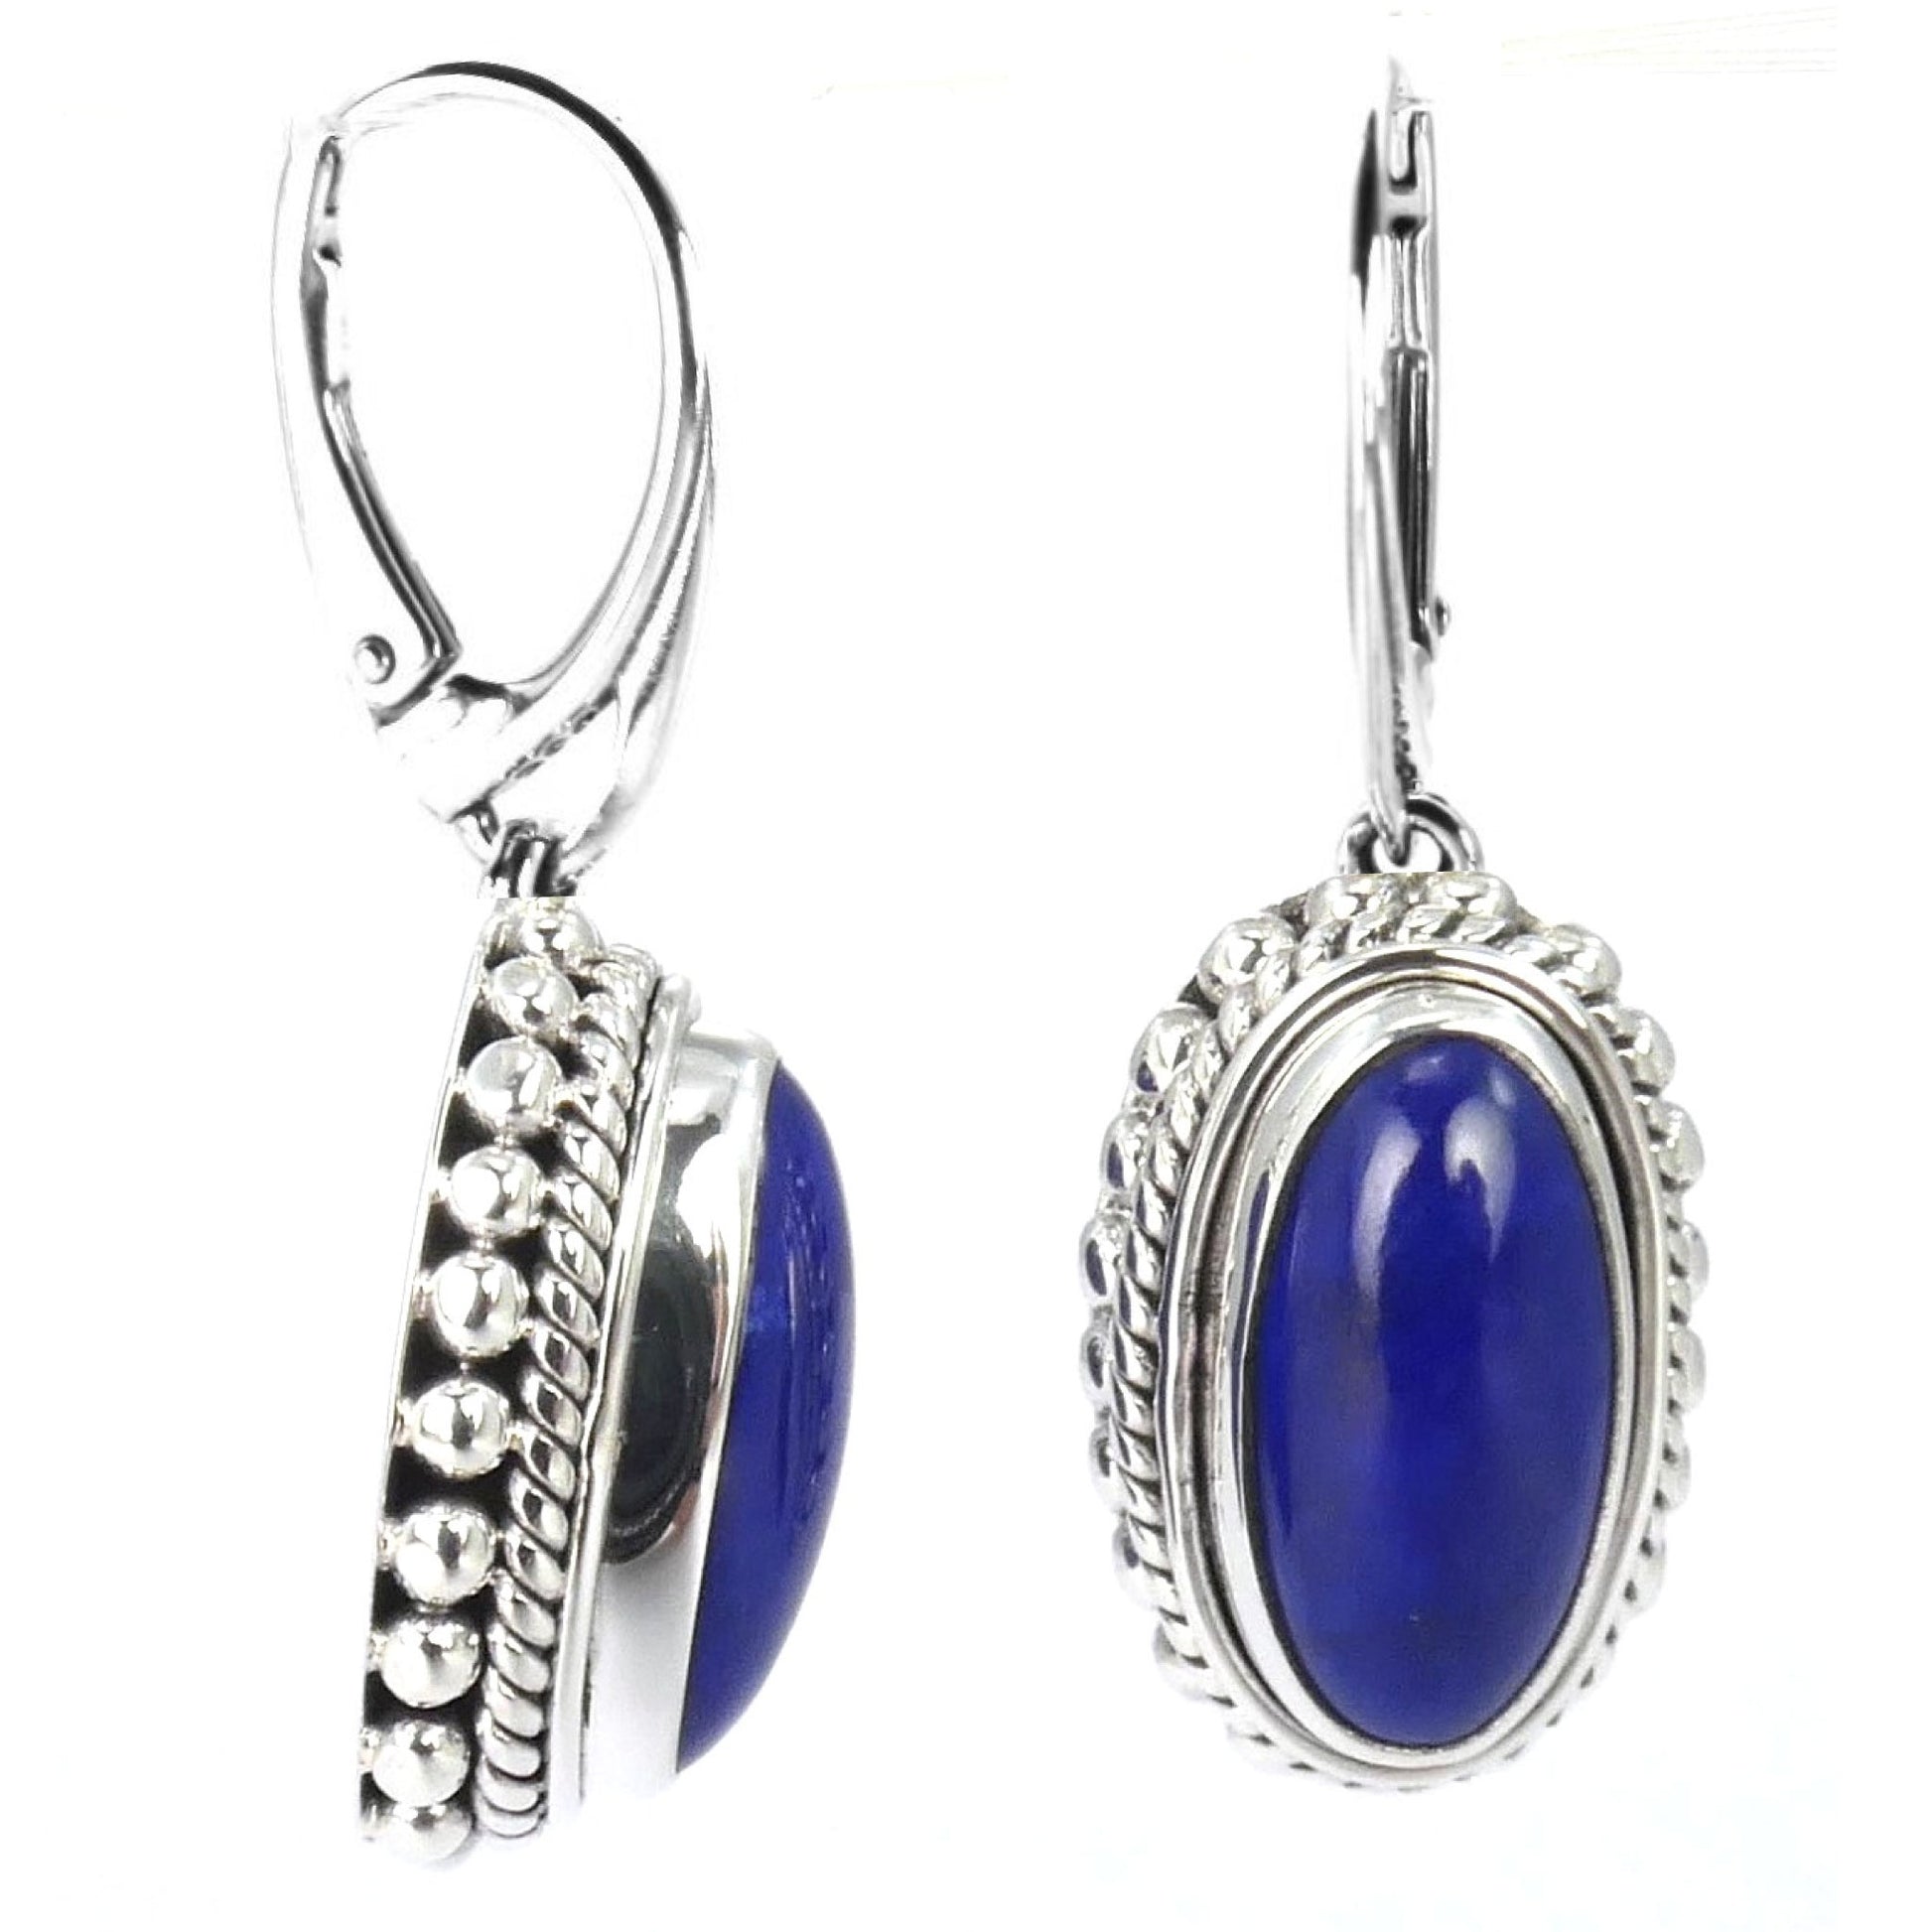 Silver earrings with oval lapis gemstones.